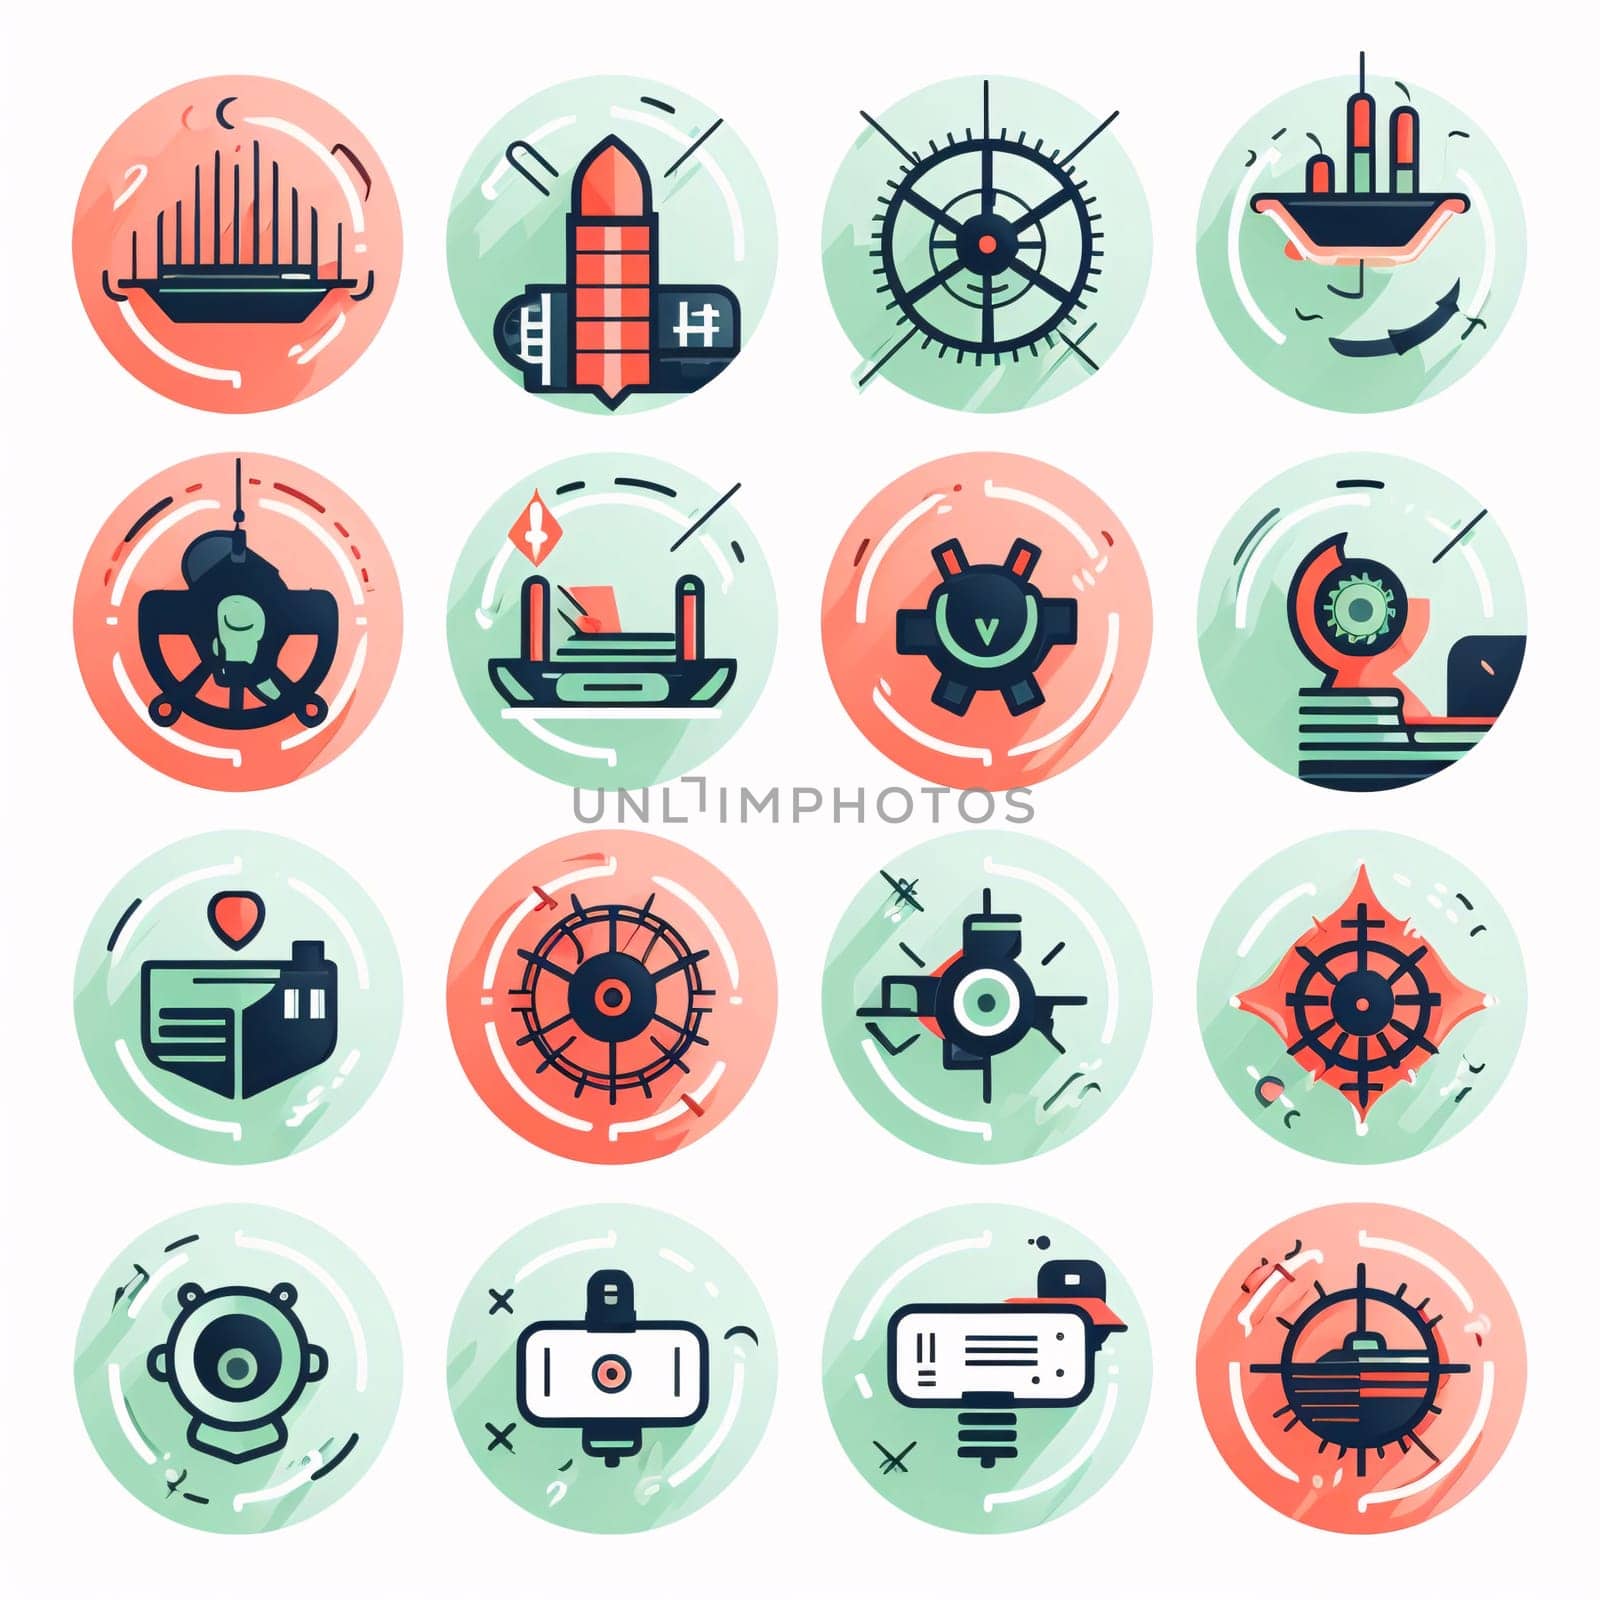 New icons collection: Steering wheel and ship icons set, flat design vector illustration.